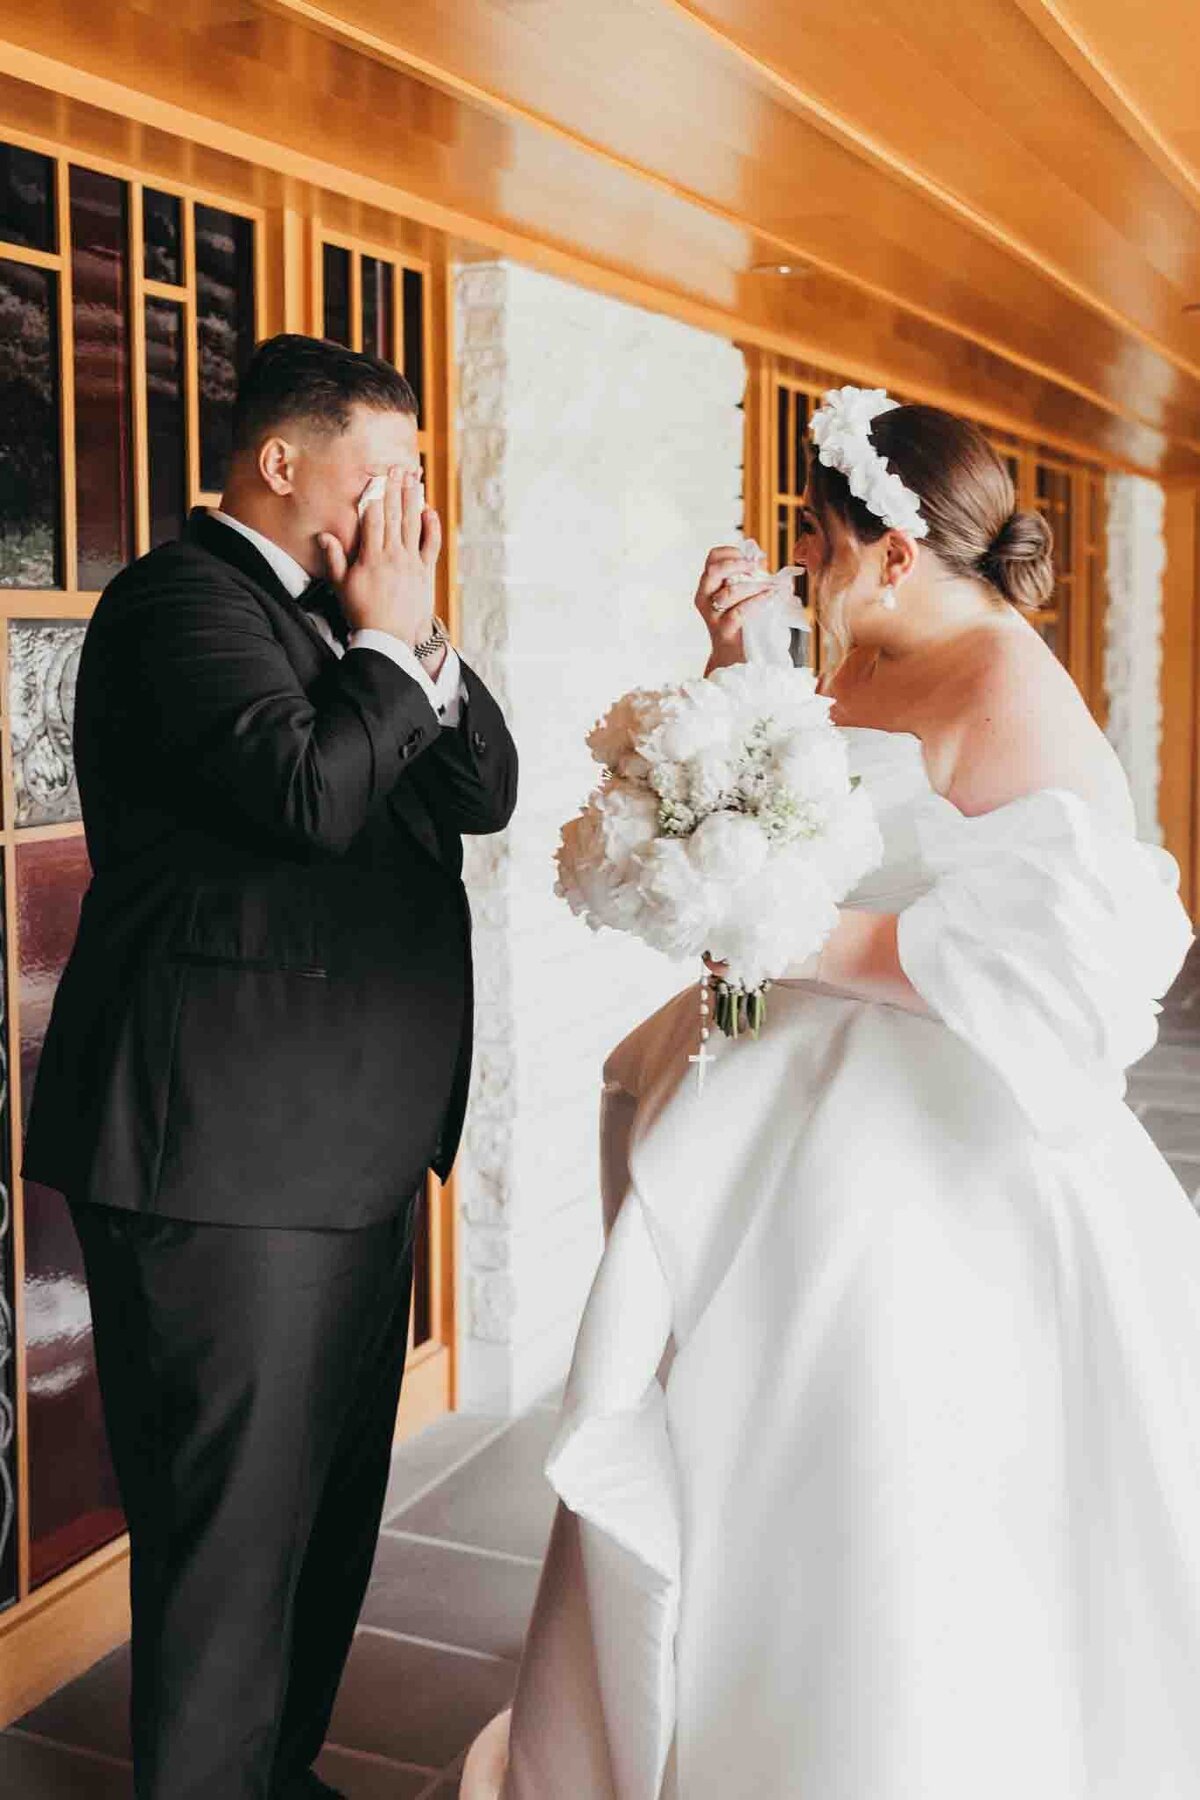 bride and groom have a sweet moment of tears during their first look together, moments before getting married.